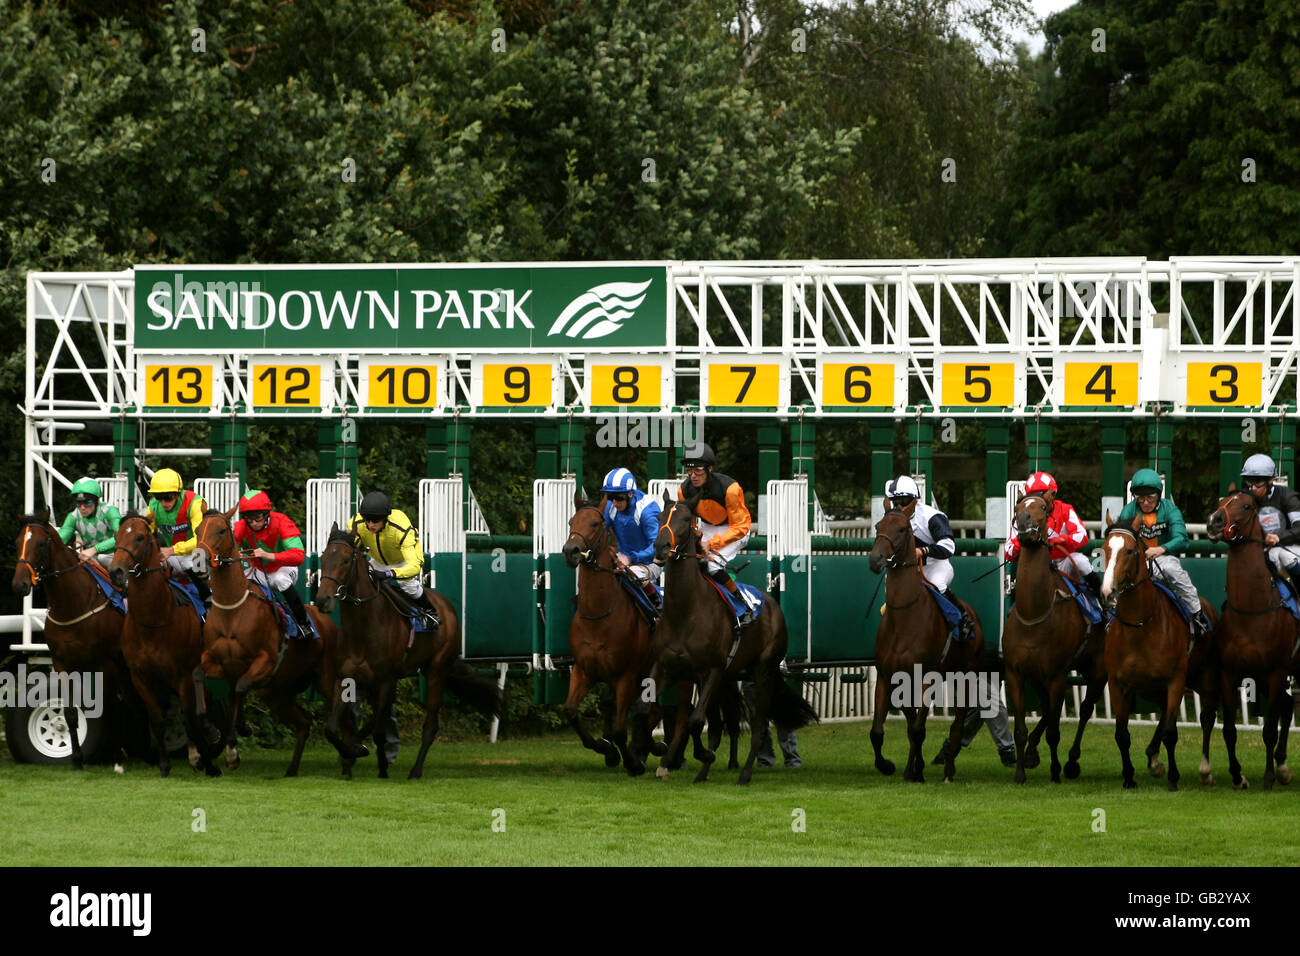 A general view of the start of the M J Milward Printing Maiden Stakes at Sandown Park Stock Photo